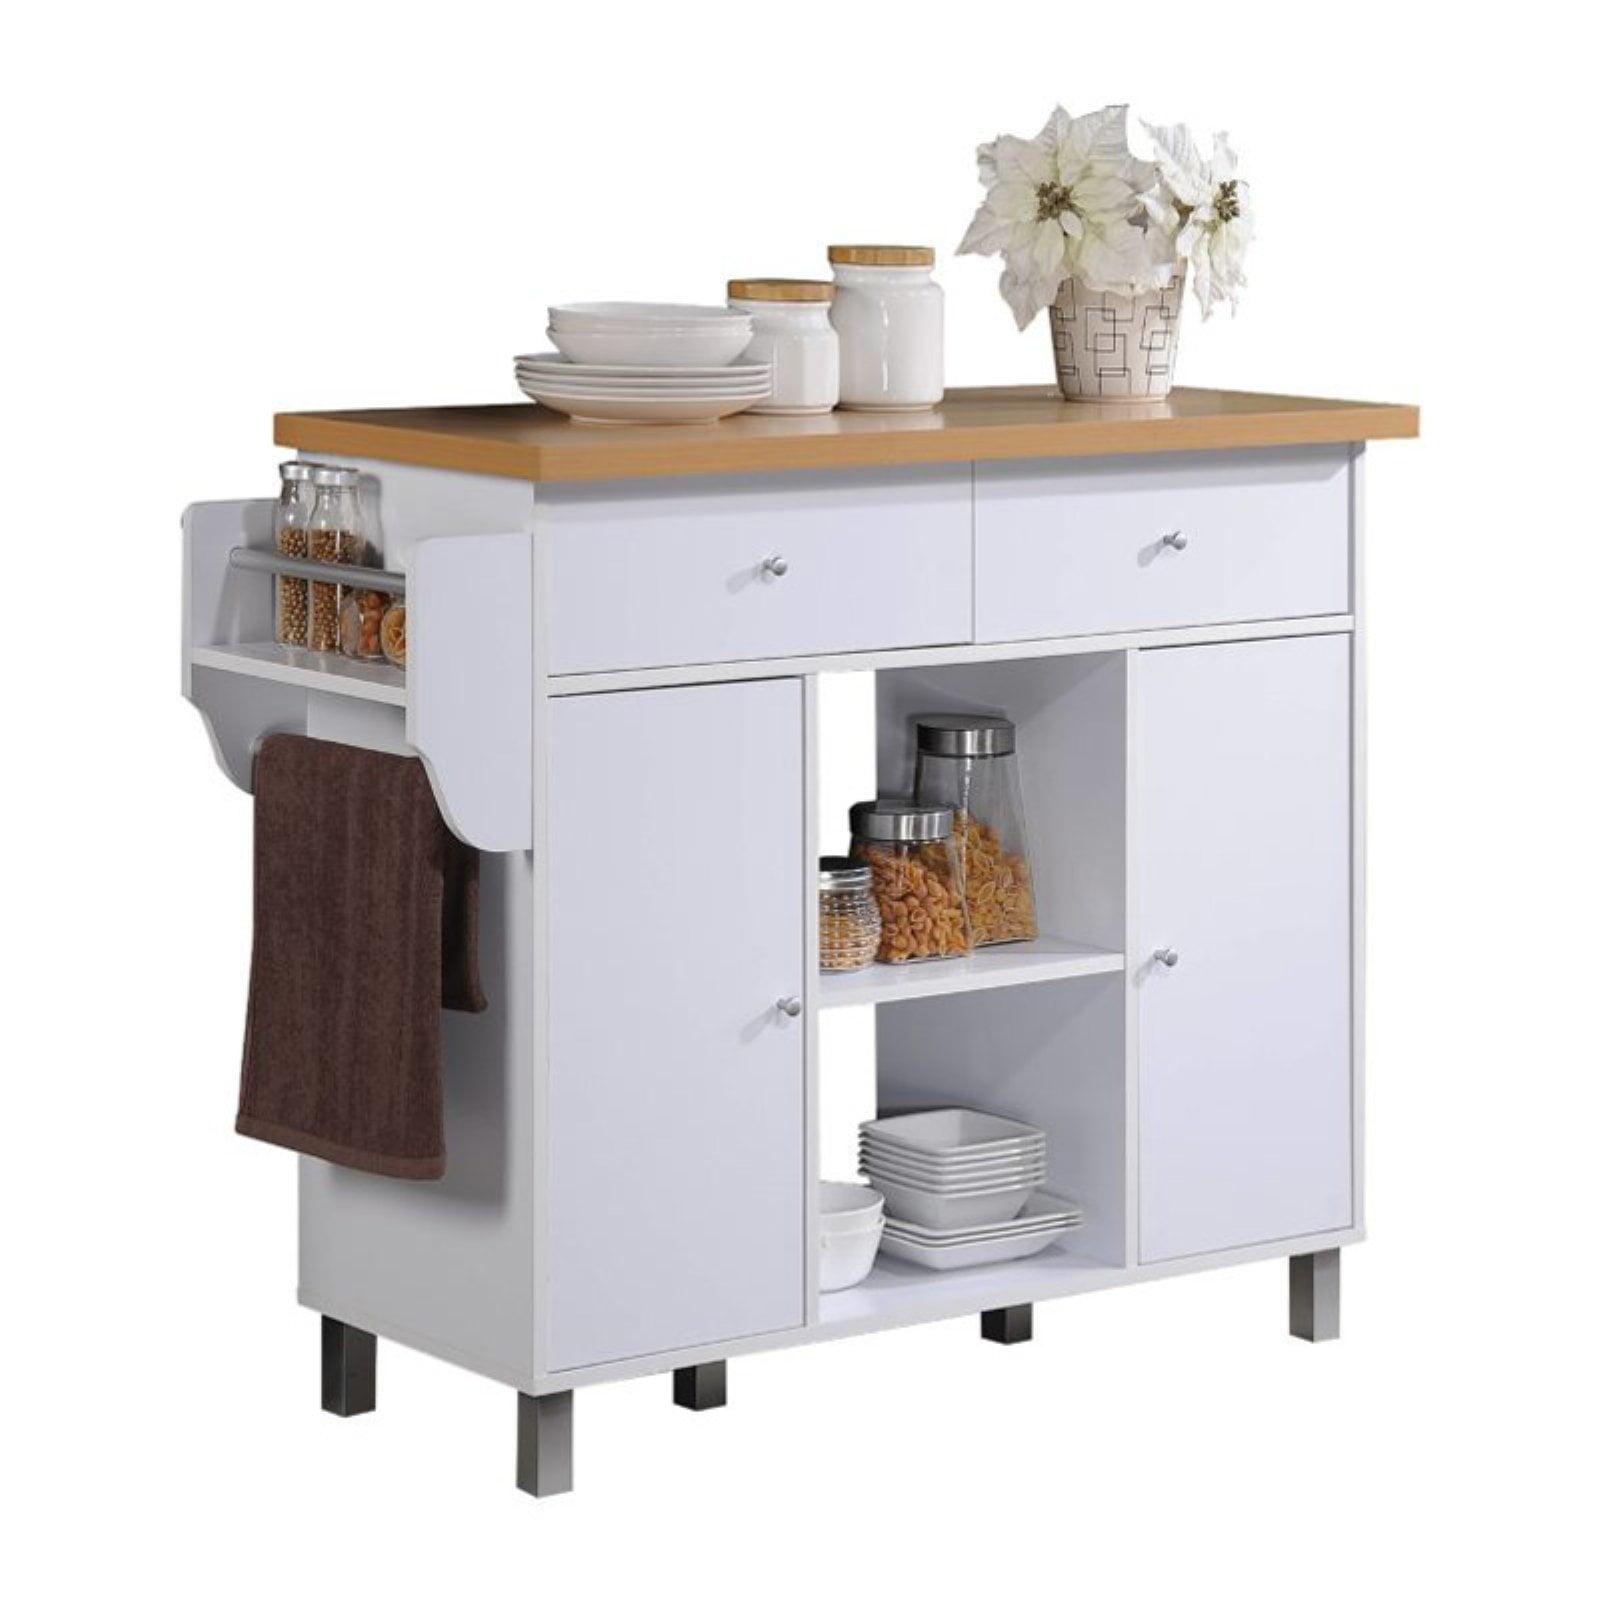 Elegant White Compressed Wood Kitchen Island with Spice and Towel Rack